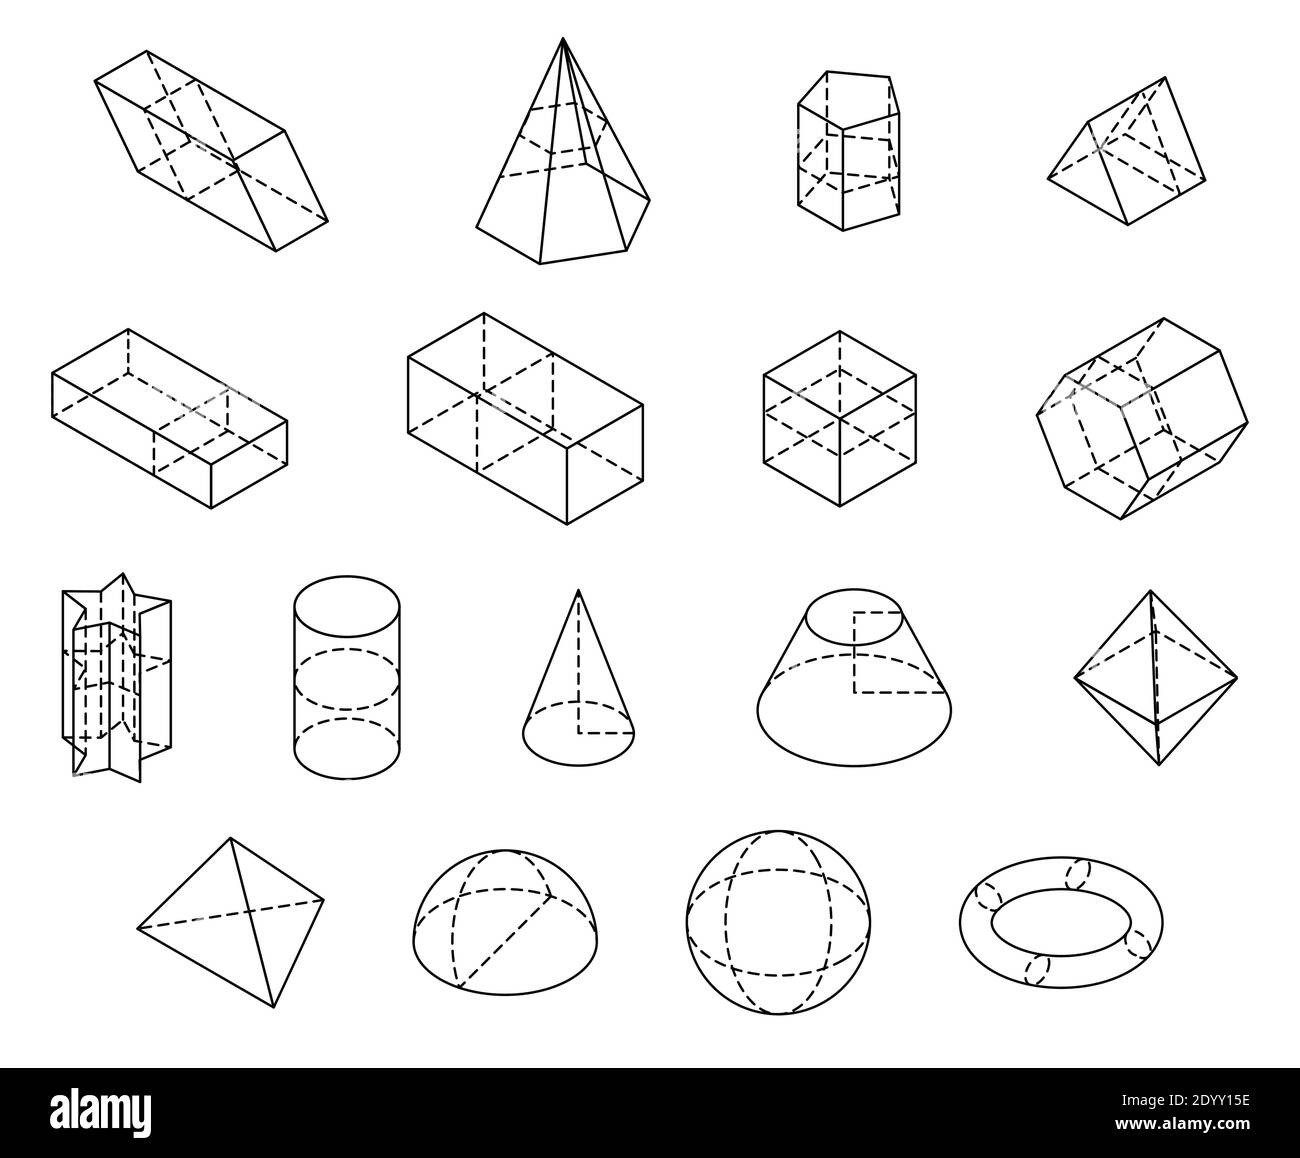 Set of isometric 3D shapes. Black outline vector illustration. The science of geometry and math. Linear geometric objects isolated on white background Stock Vector